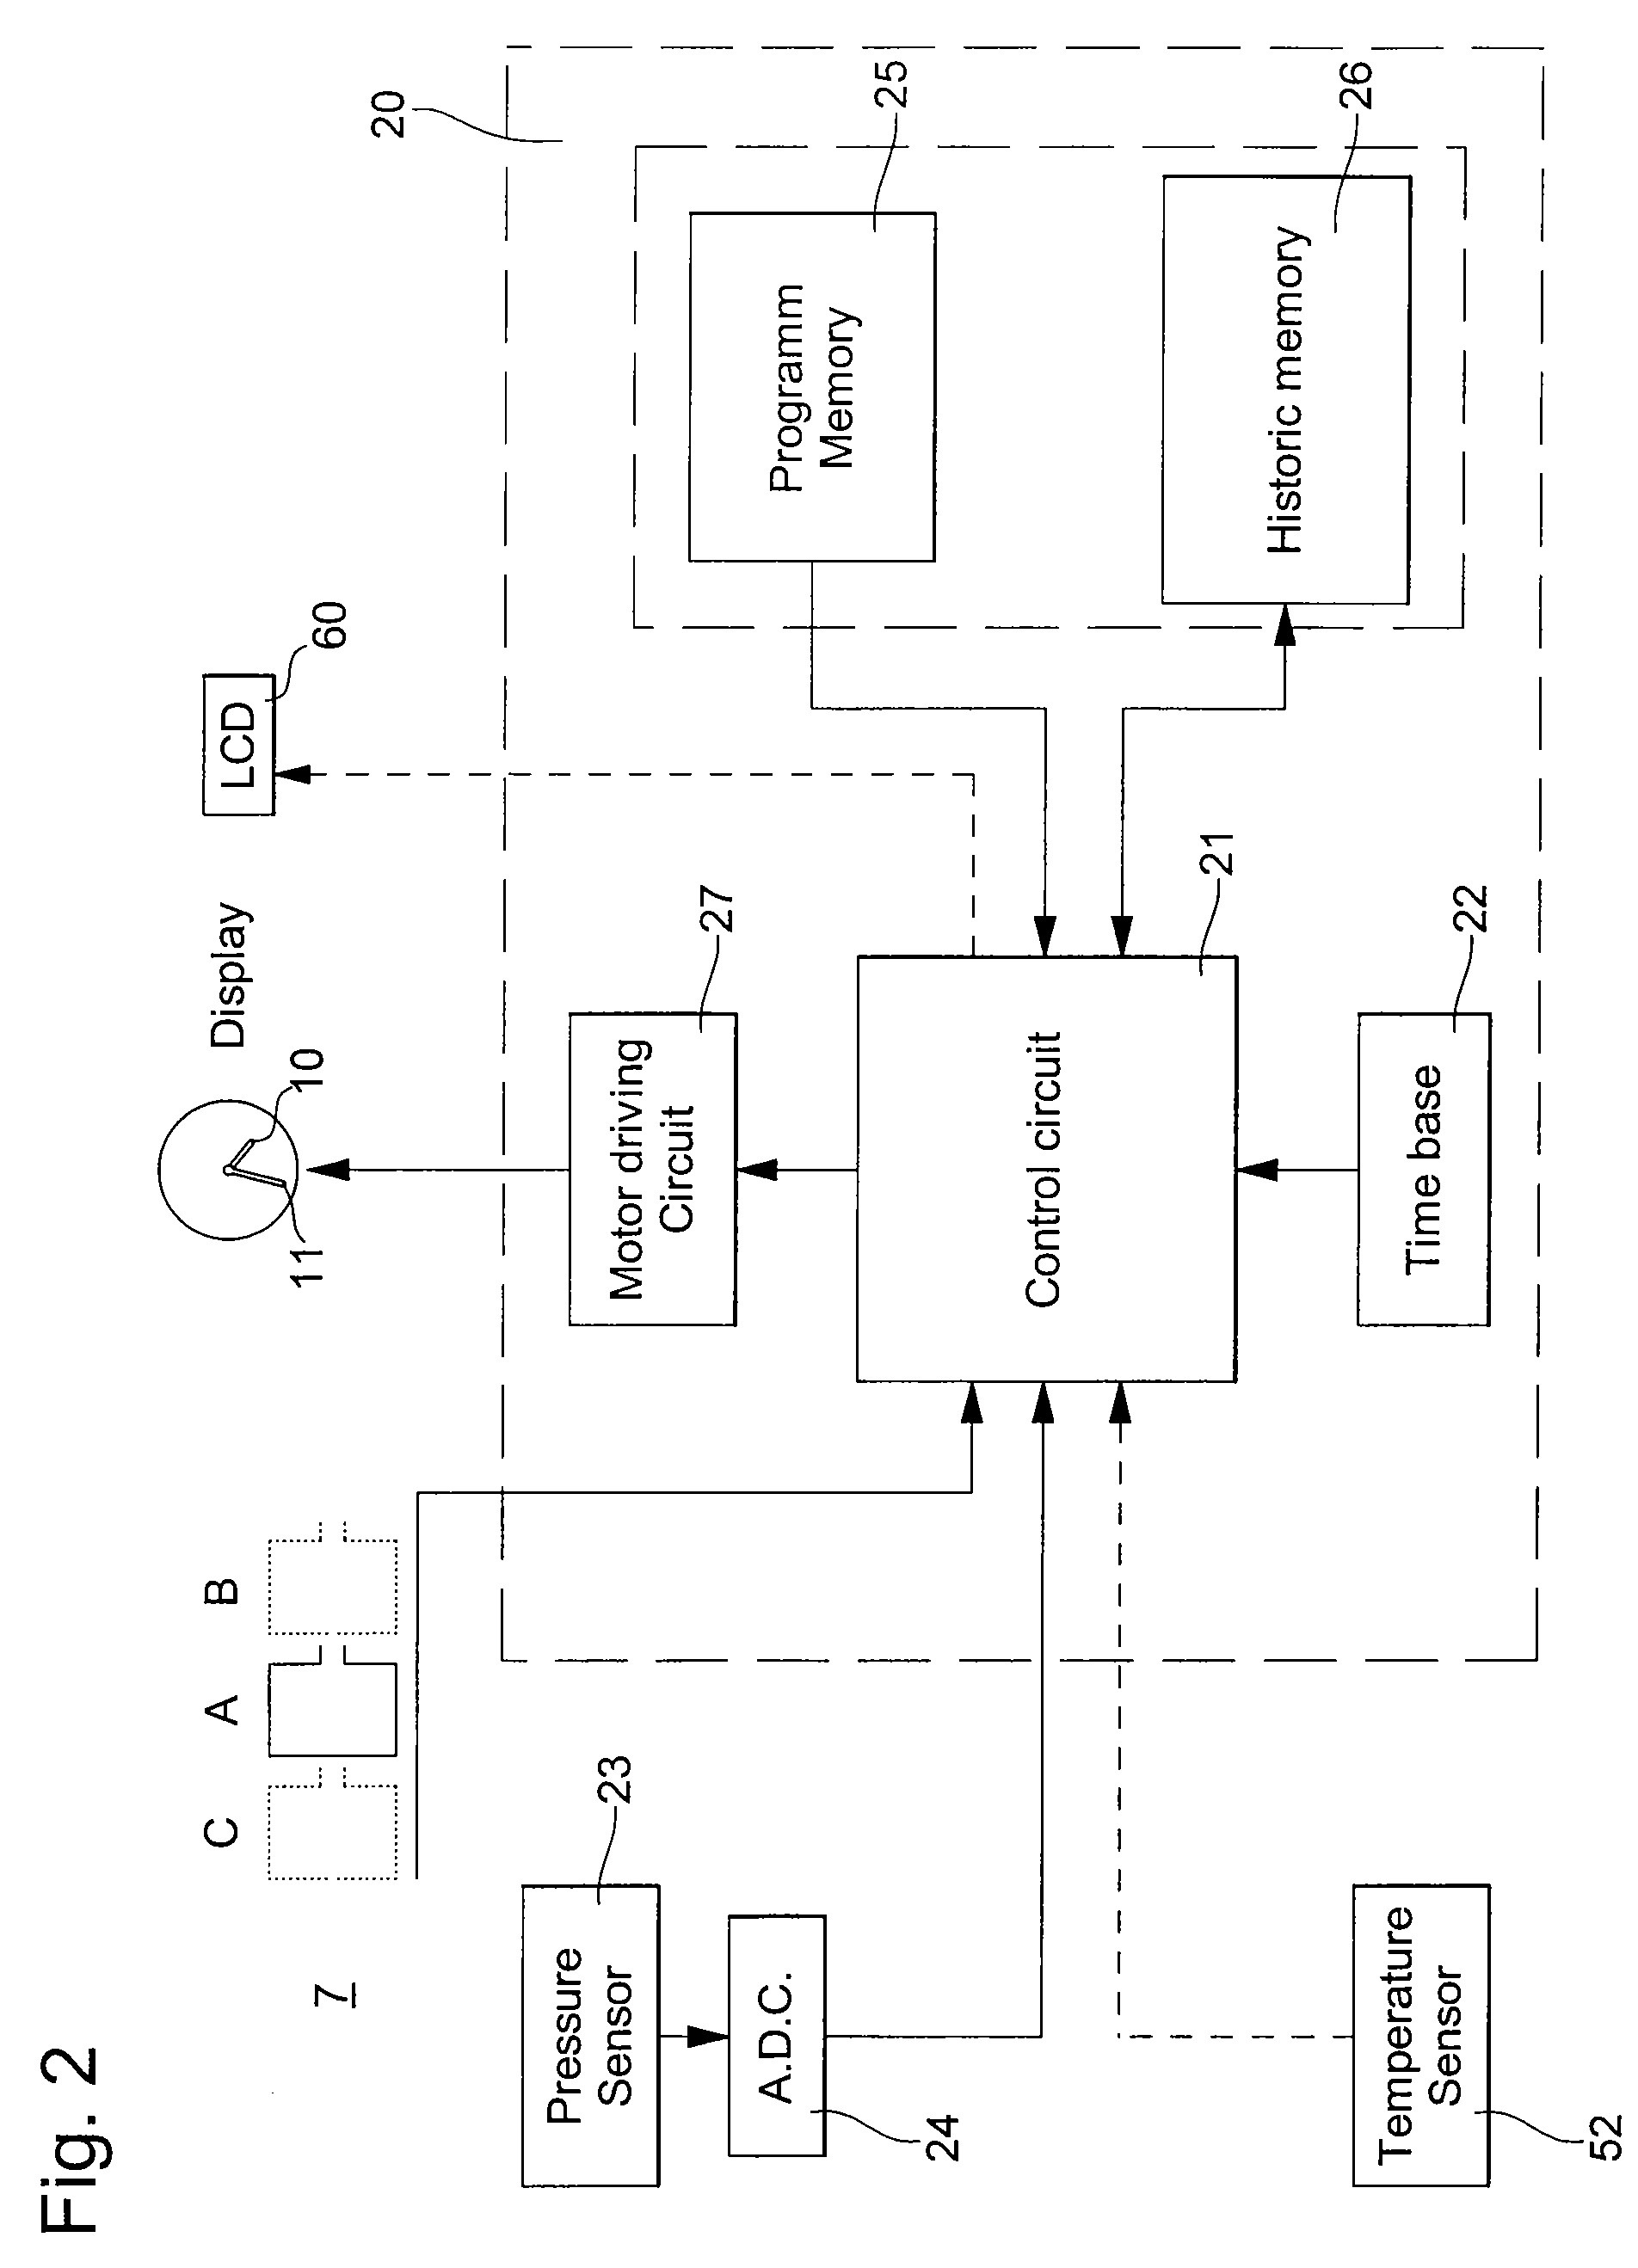 Electronic device with analogue display of the history of at least one quantity measured by a sensor